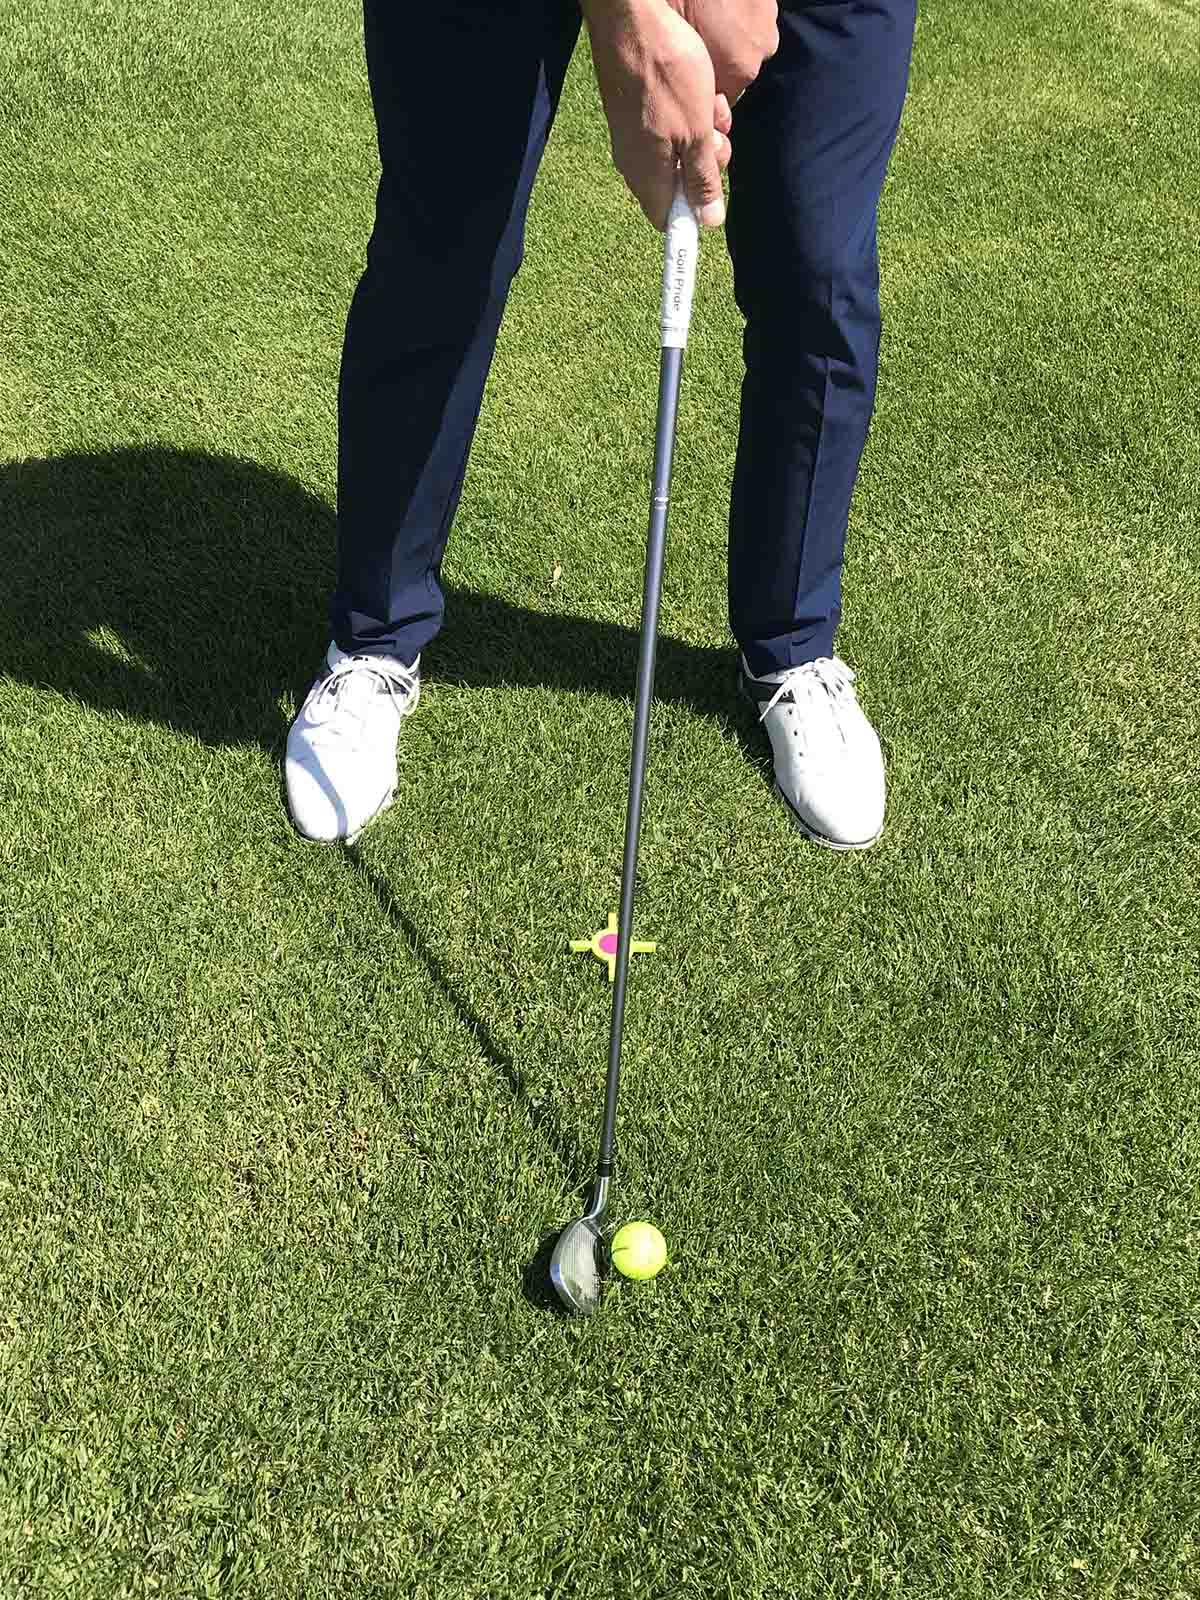 club straight and centered